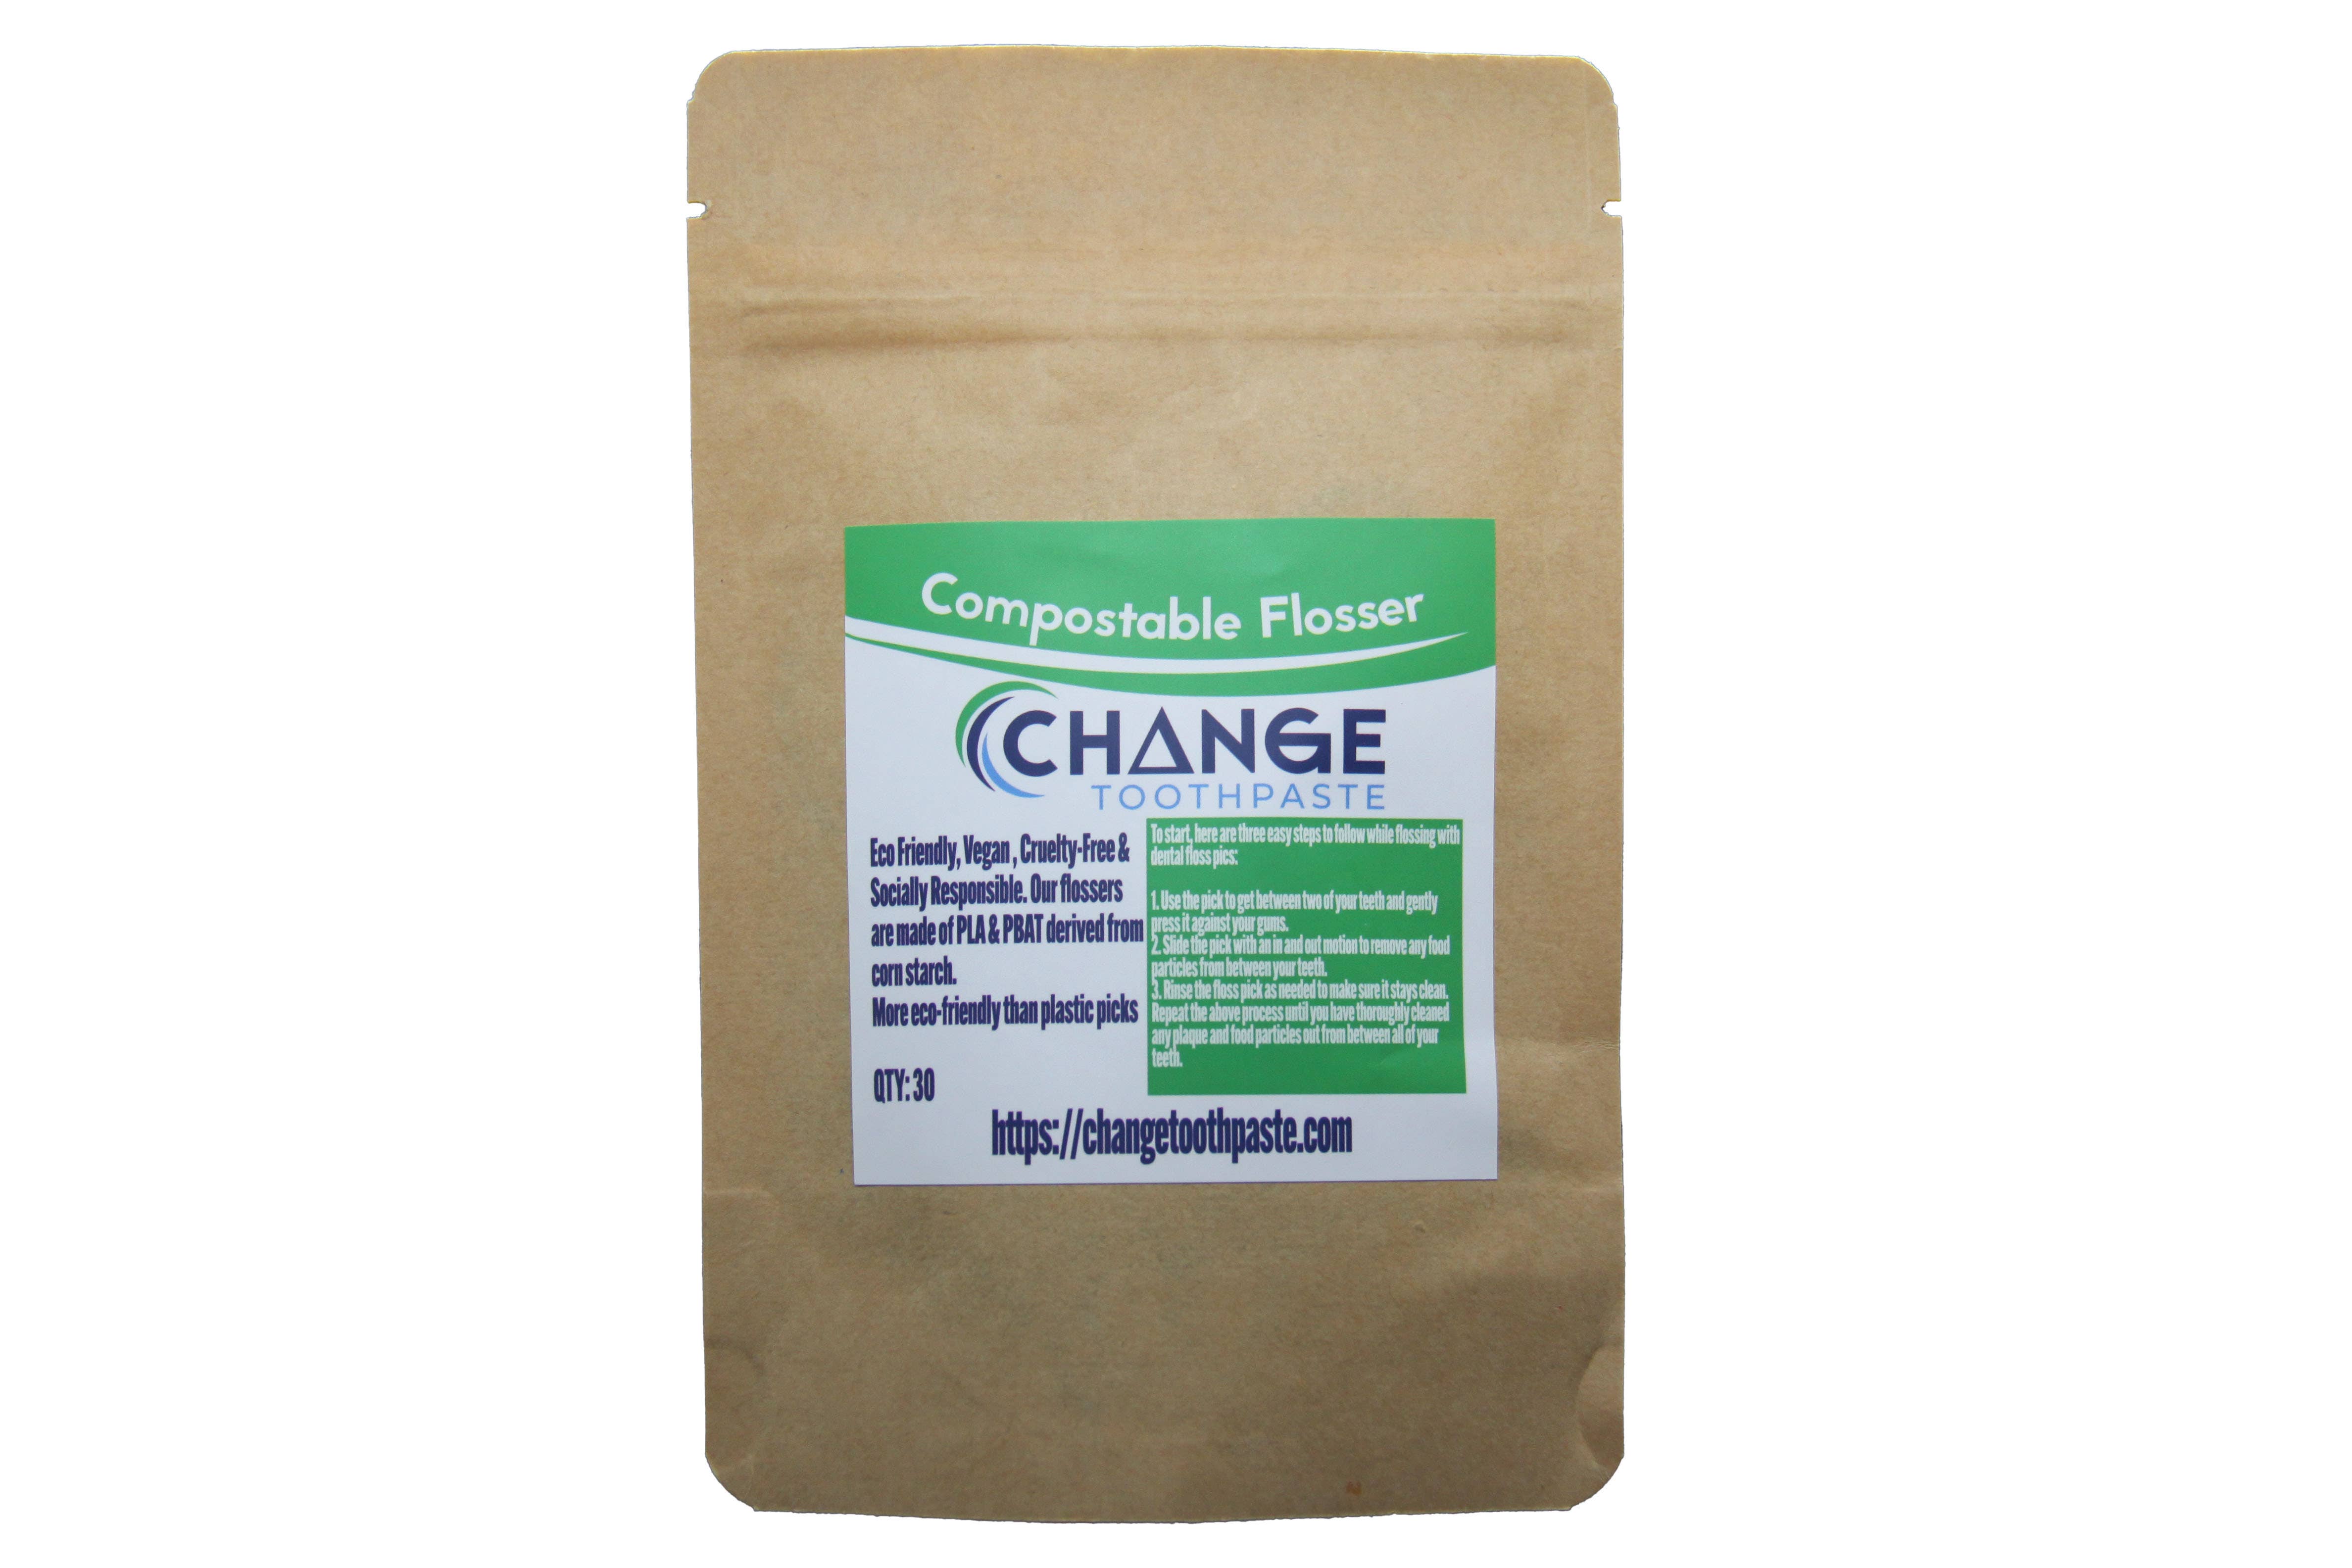 Change - Compostable Flossers